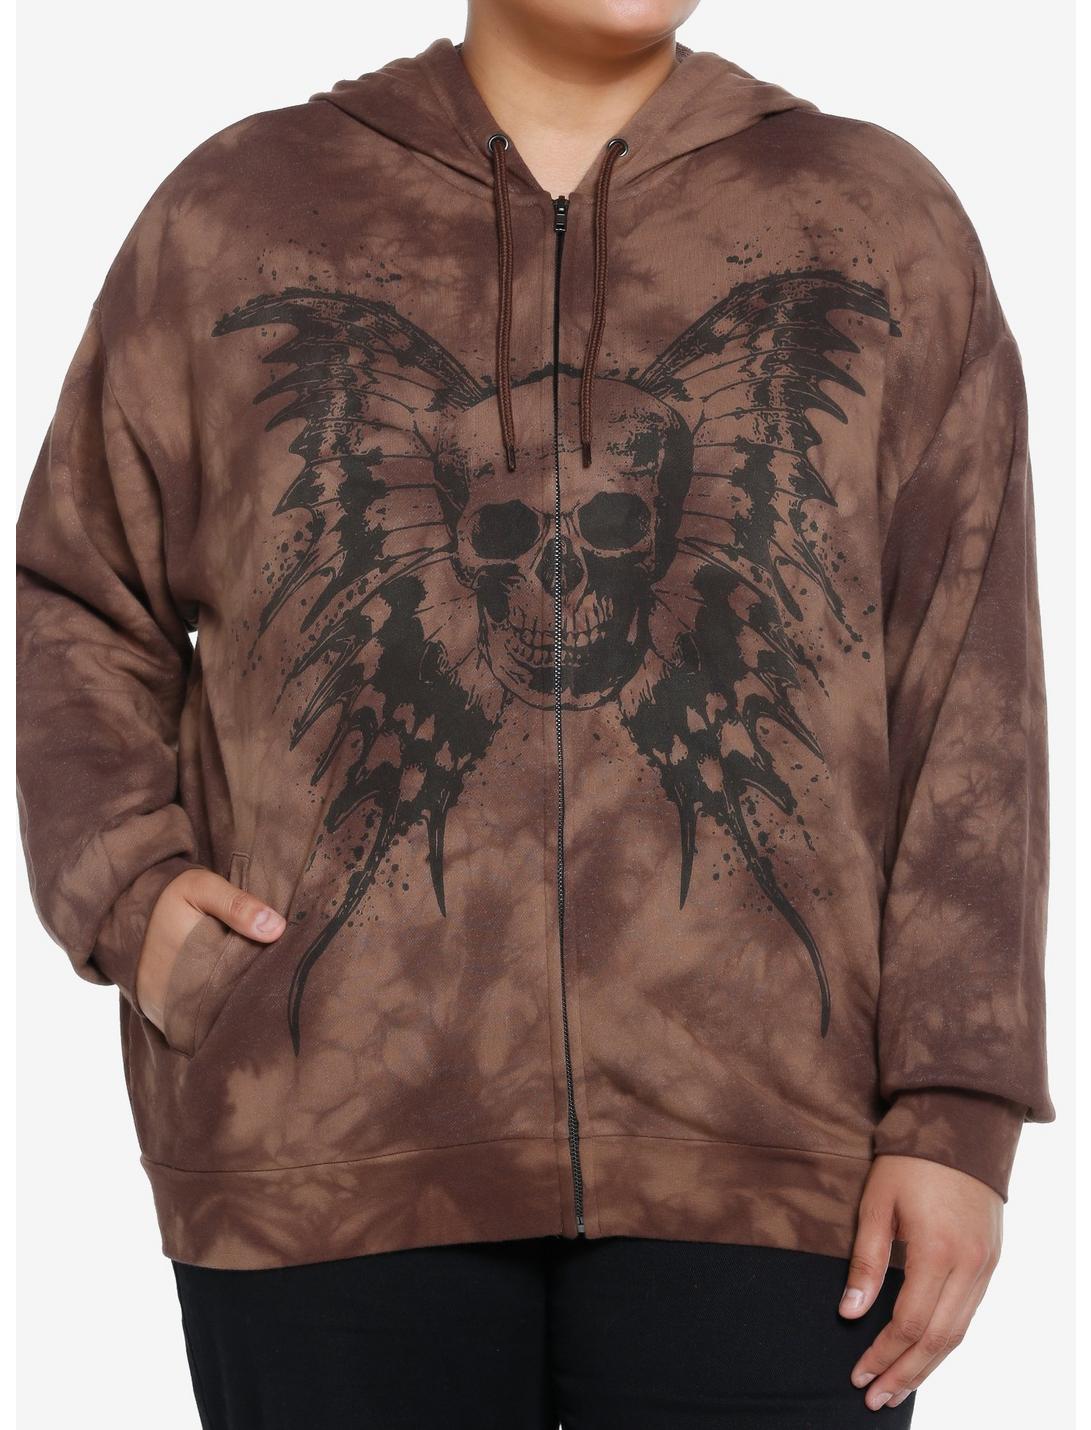 Thorn & Fable Butterfly Skull Brown Wash Girls Oversized Hoodie Plus Size, BROWN, hi-res